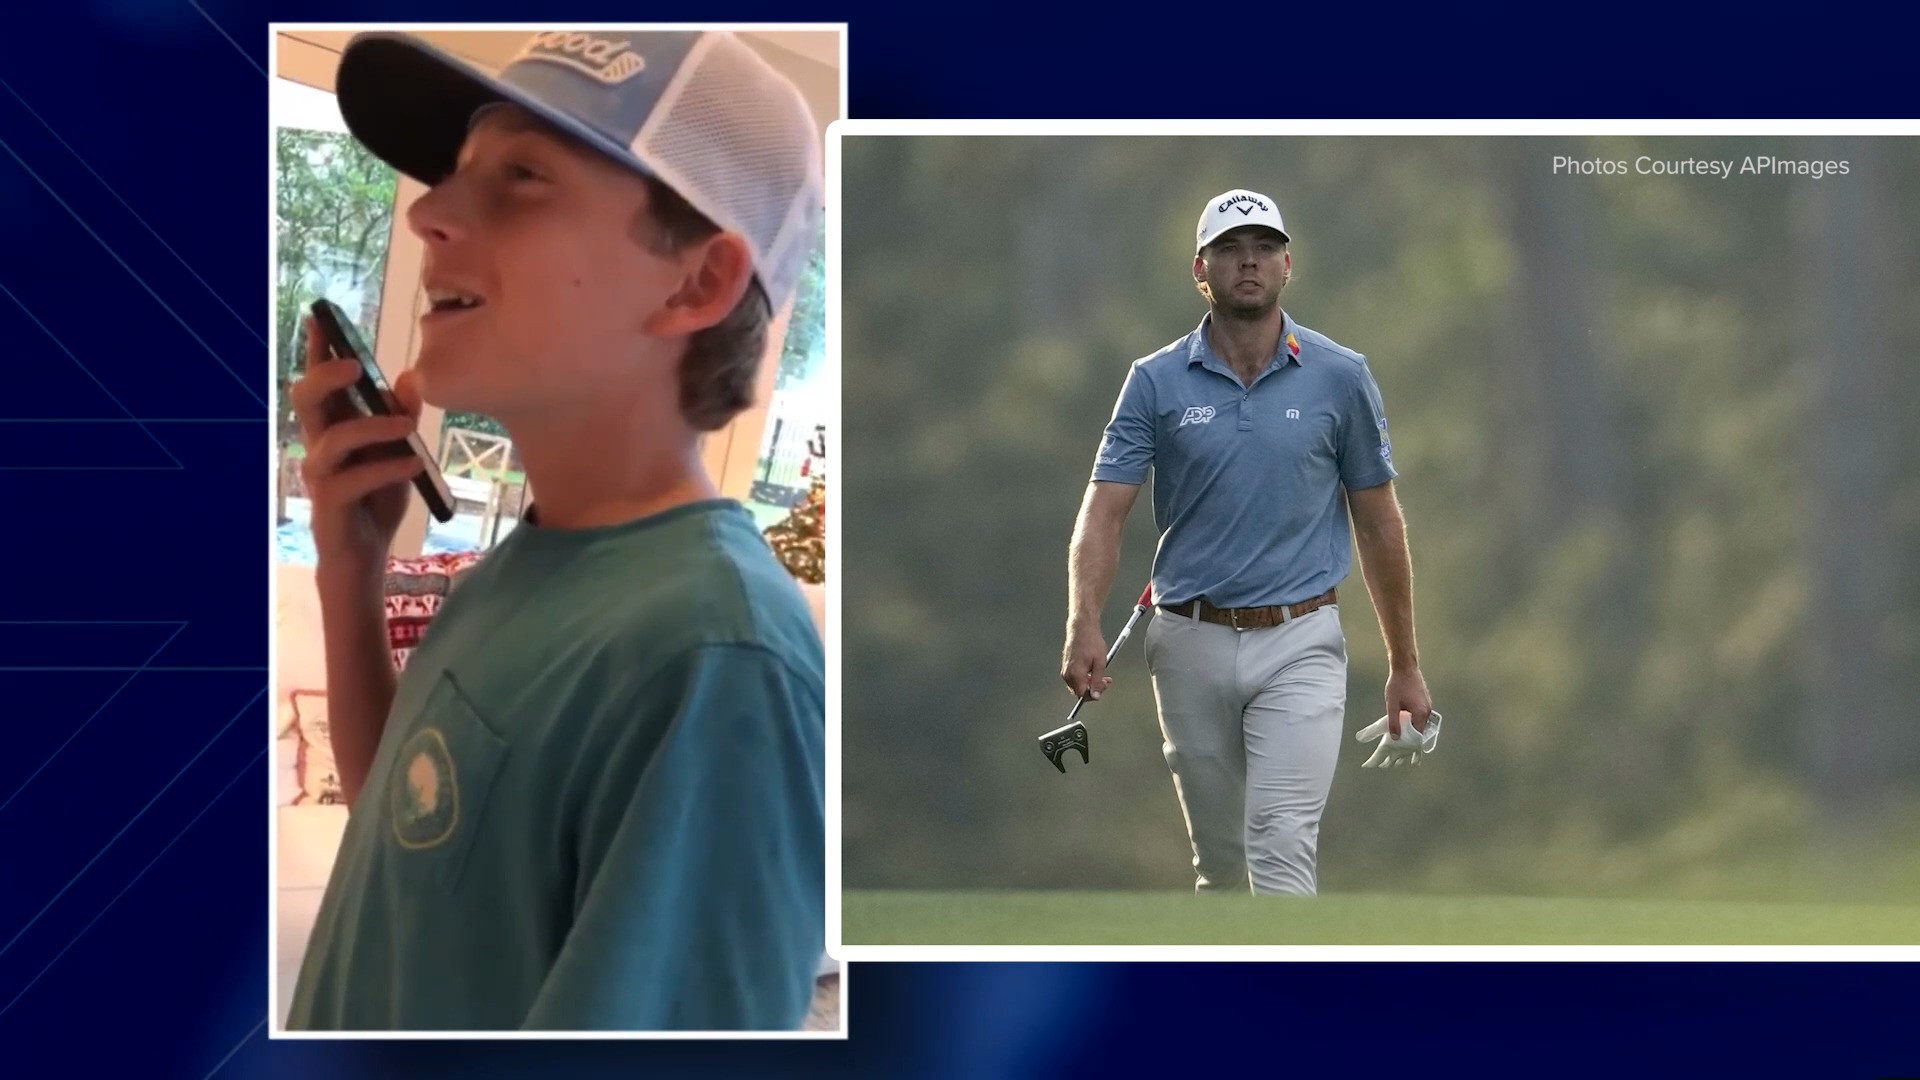 The Zurich Classic tees off on Thursday in Avondale, and Louisiana native Sam Burns is certainly a fan favorite.